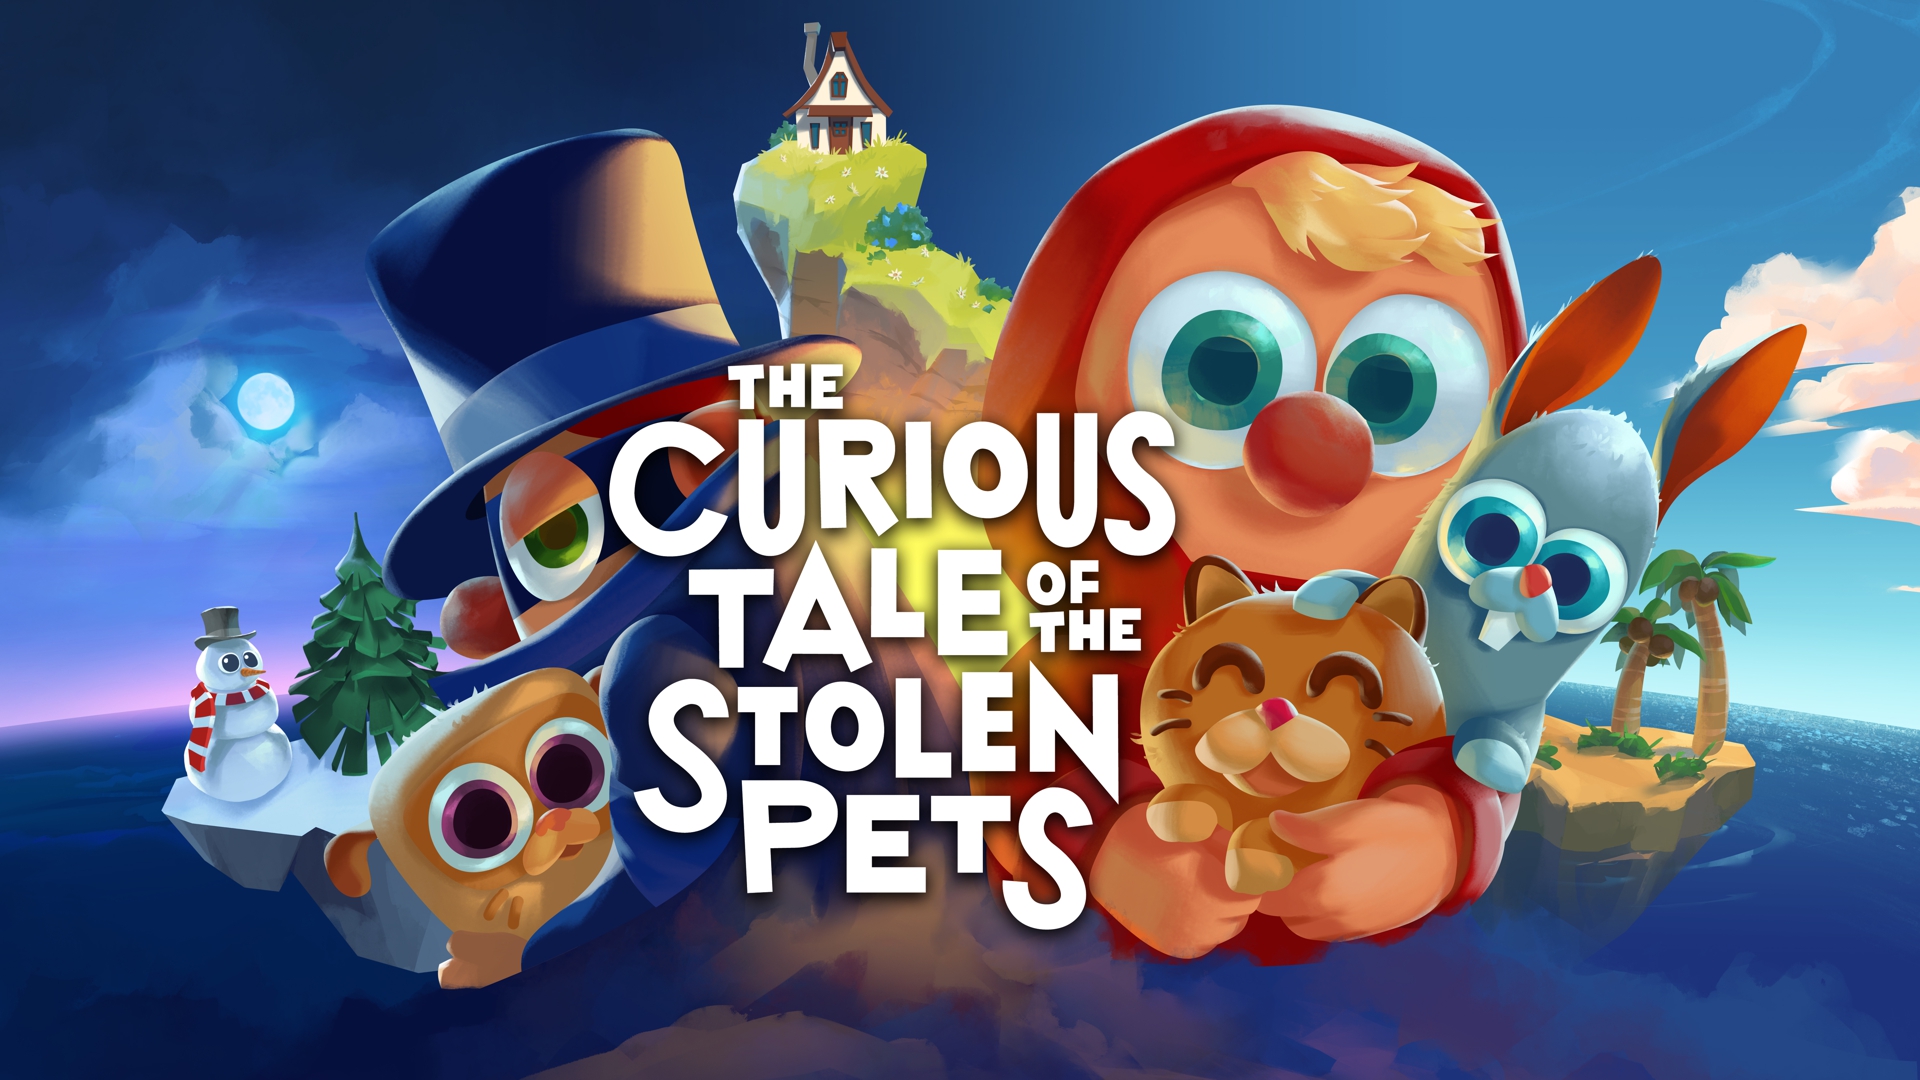 The Curious Tale of the Stolen Pets Principal